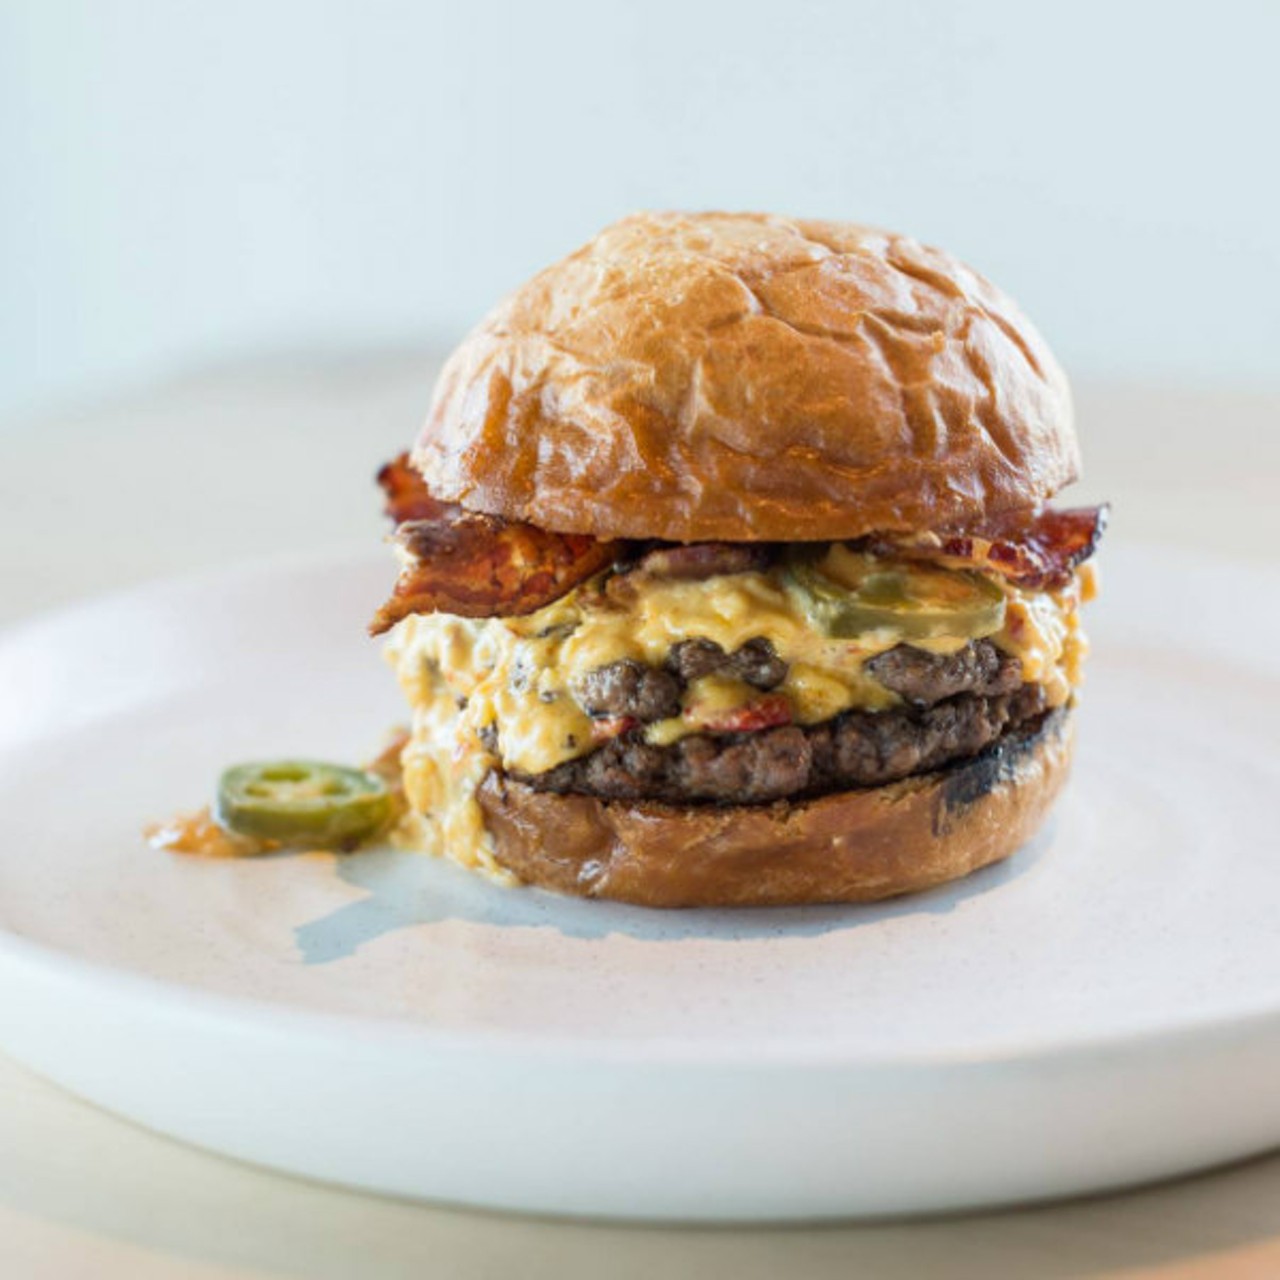 The Chocolate Pig
(4220 Duncan Avenue; 314-272-3230)
Pimiento Cheese Double Double with Pickled Jalapenos and Bacon on a Brioche Bun.